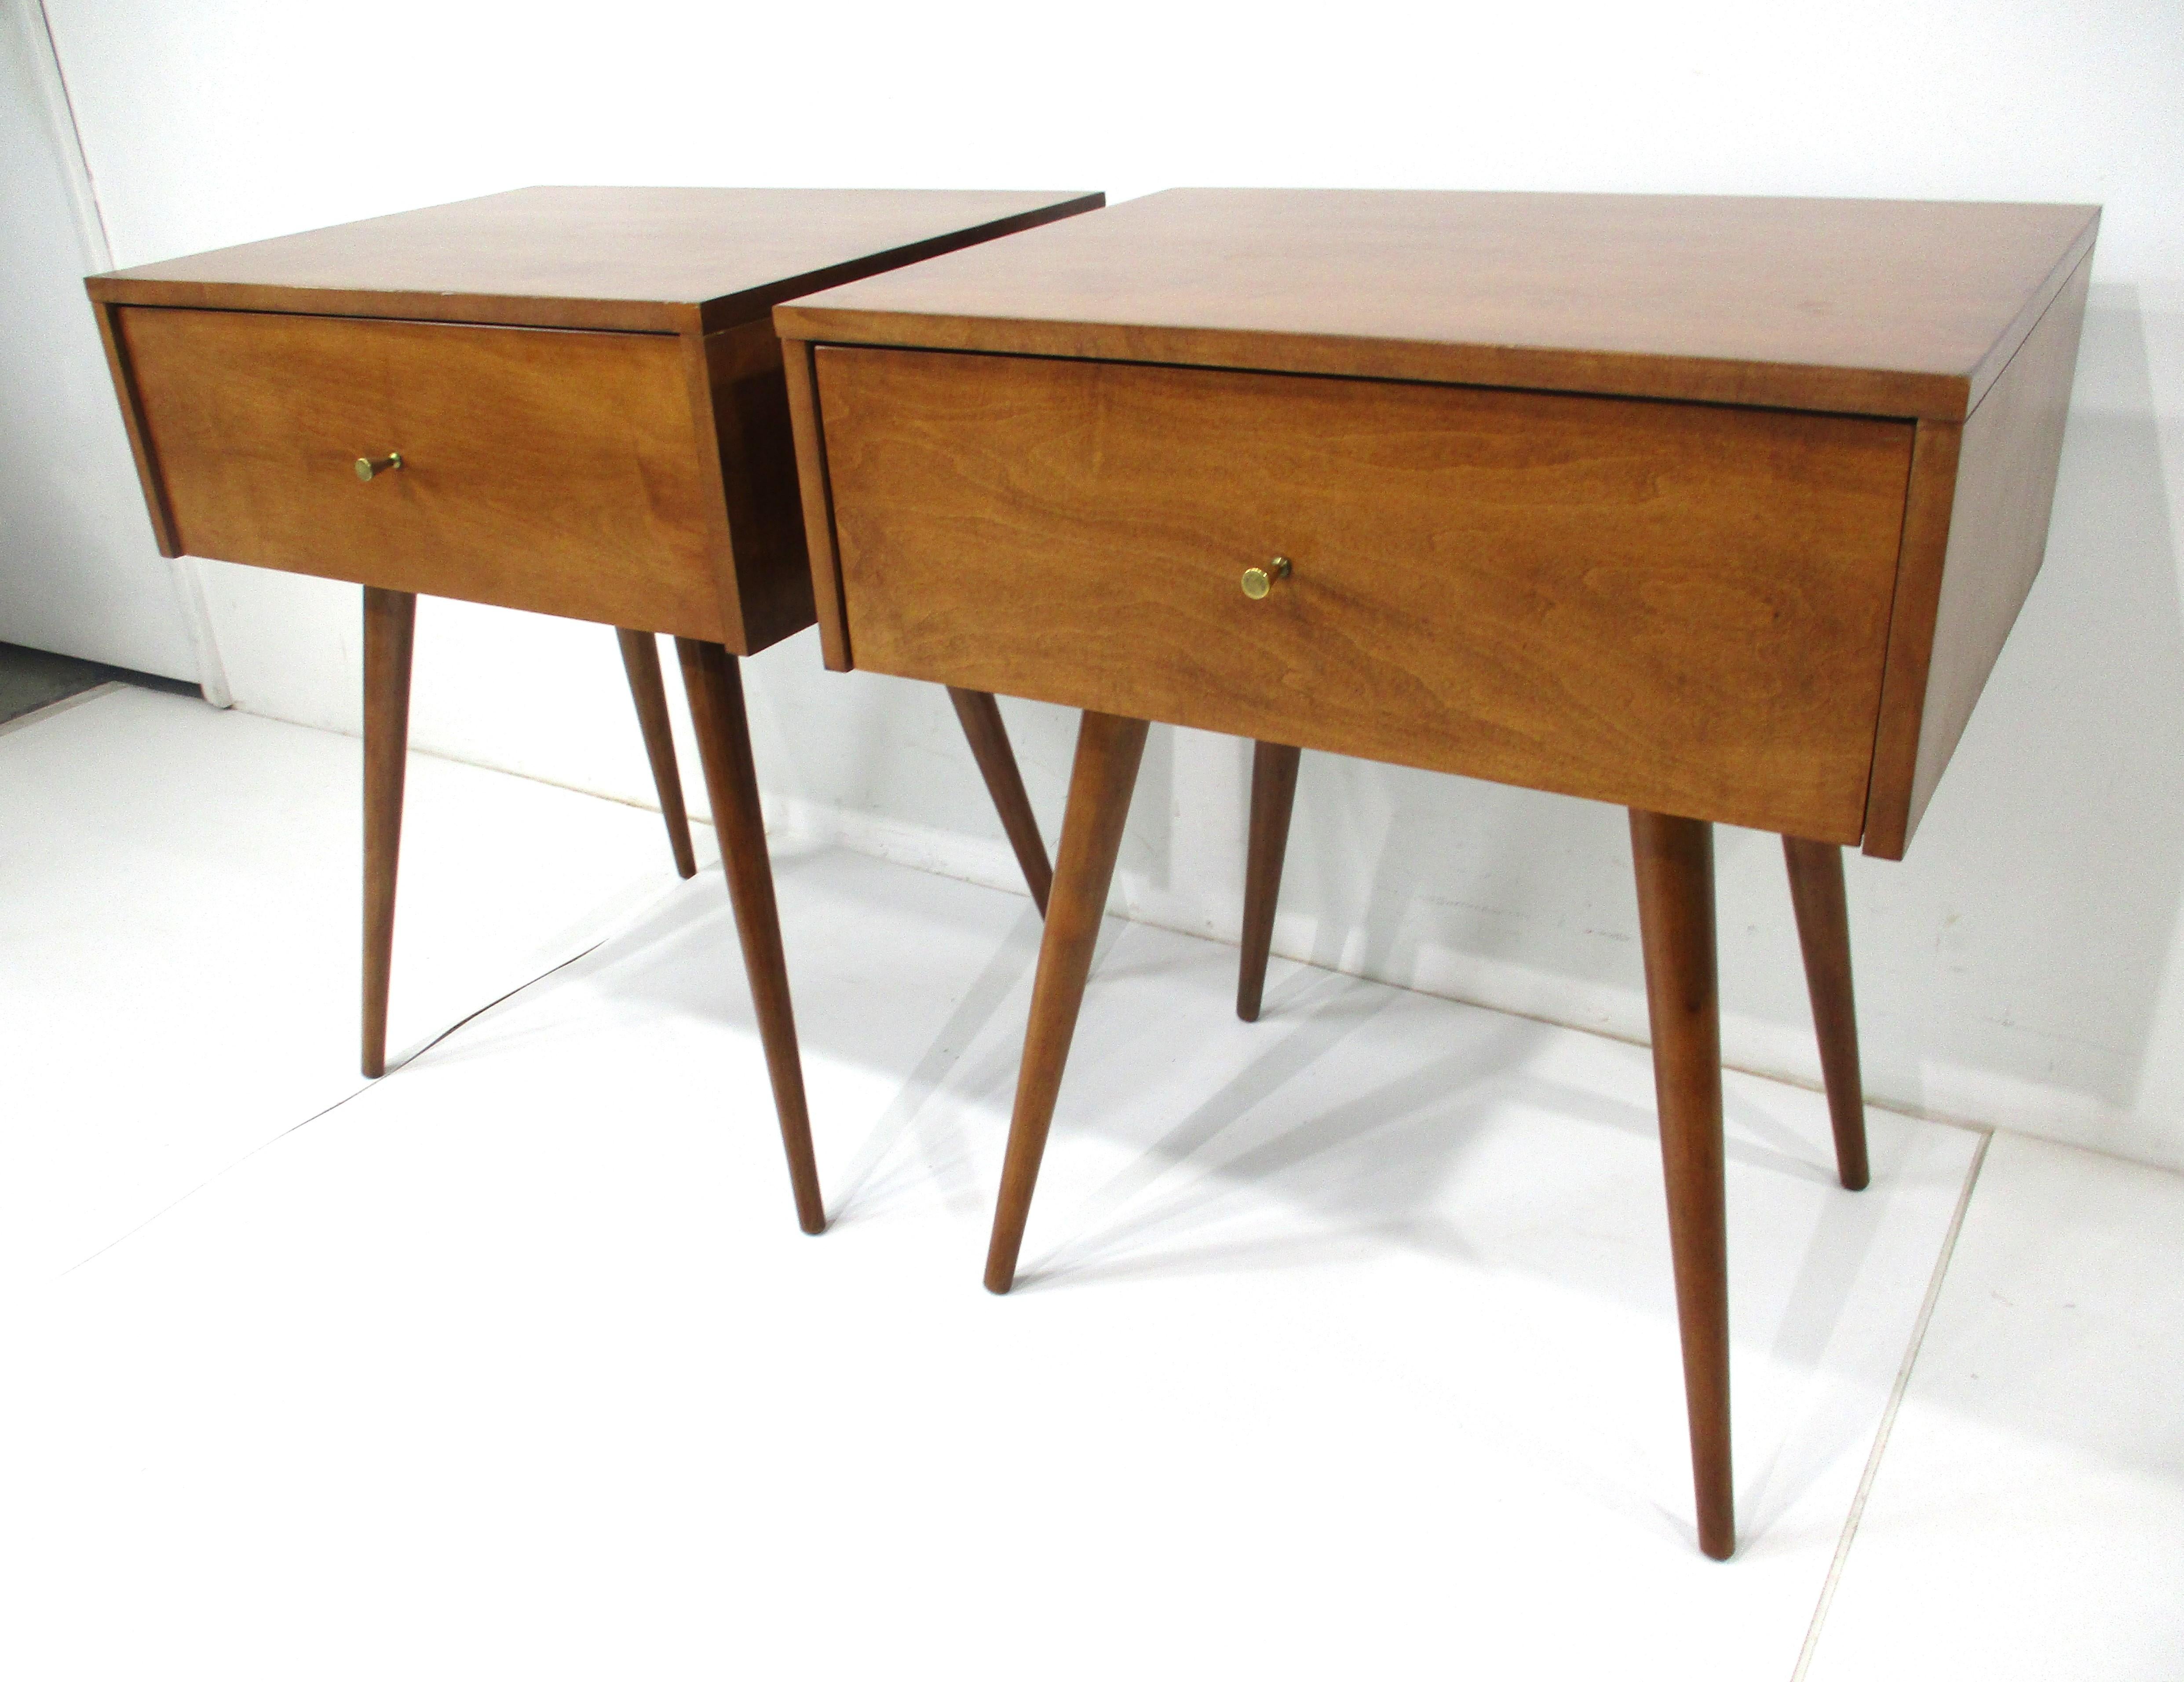 A pair of medium walnut toned solid maple wood nightstands with a single drawer to each having brass pulls . Siting on conical legs which are in a higher profile to match todays mattresses heights with a form that is simple but functional able to